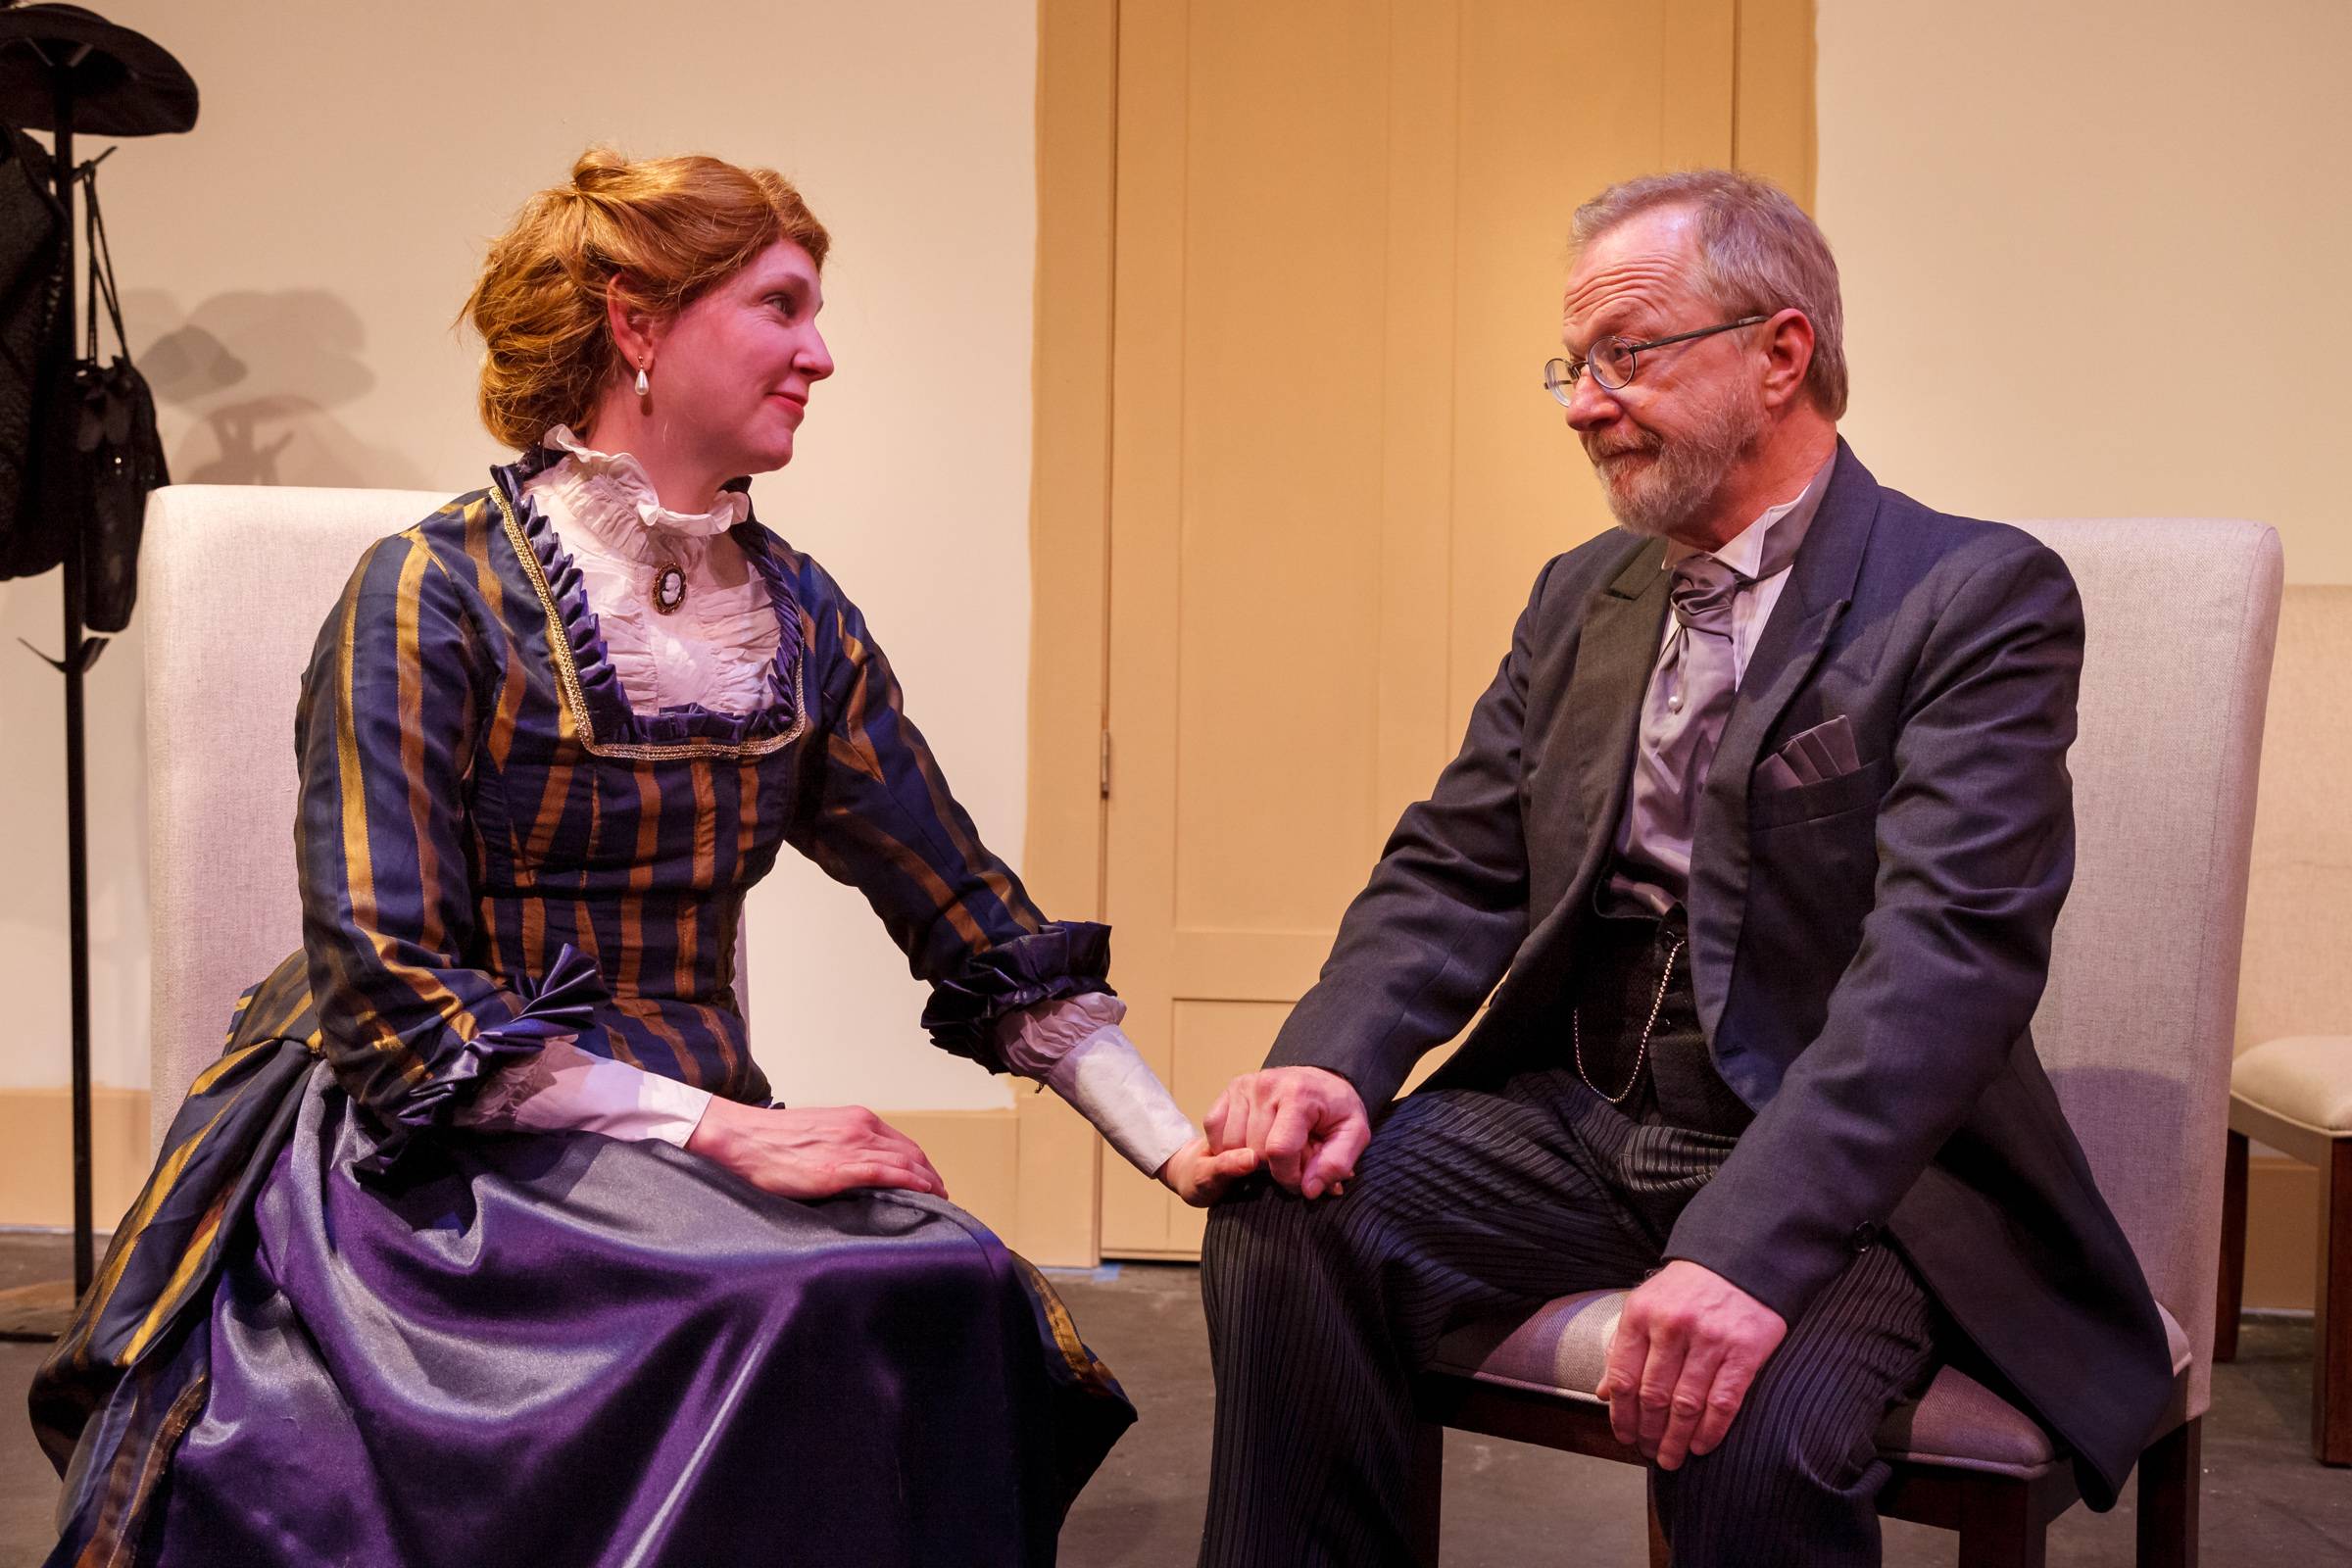 ‘Part 2’ offers theatrical fanfiction and modern perspective through Victorian lens